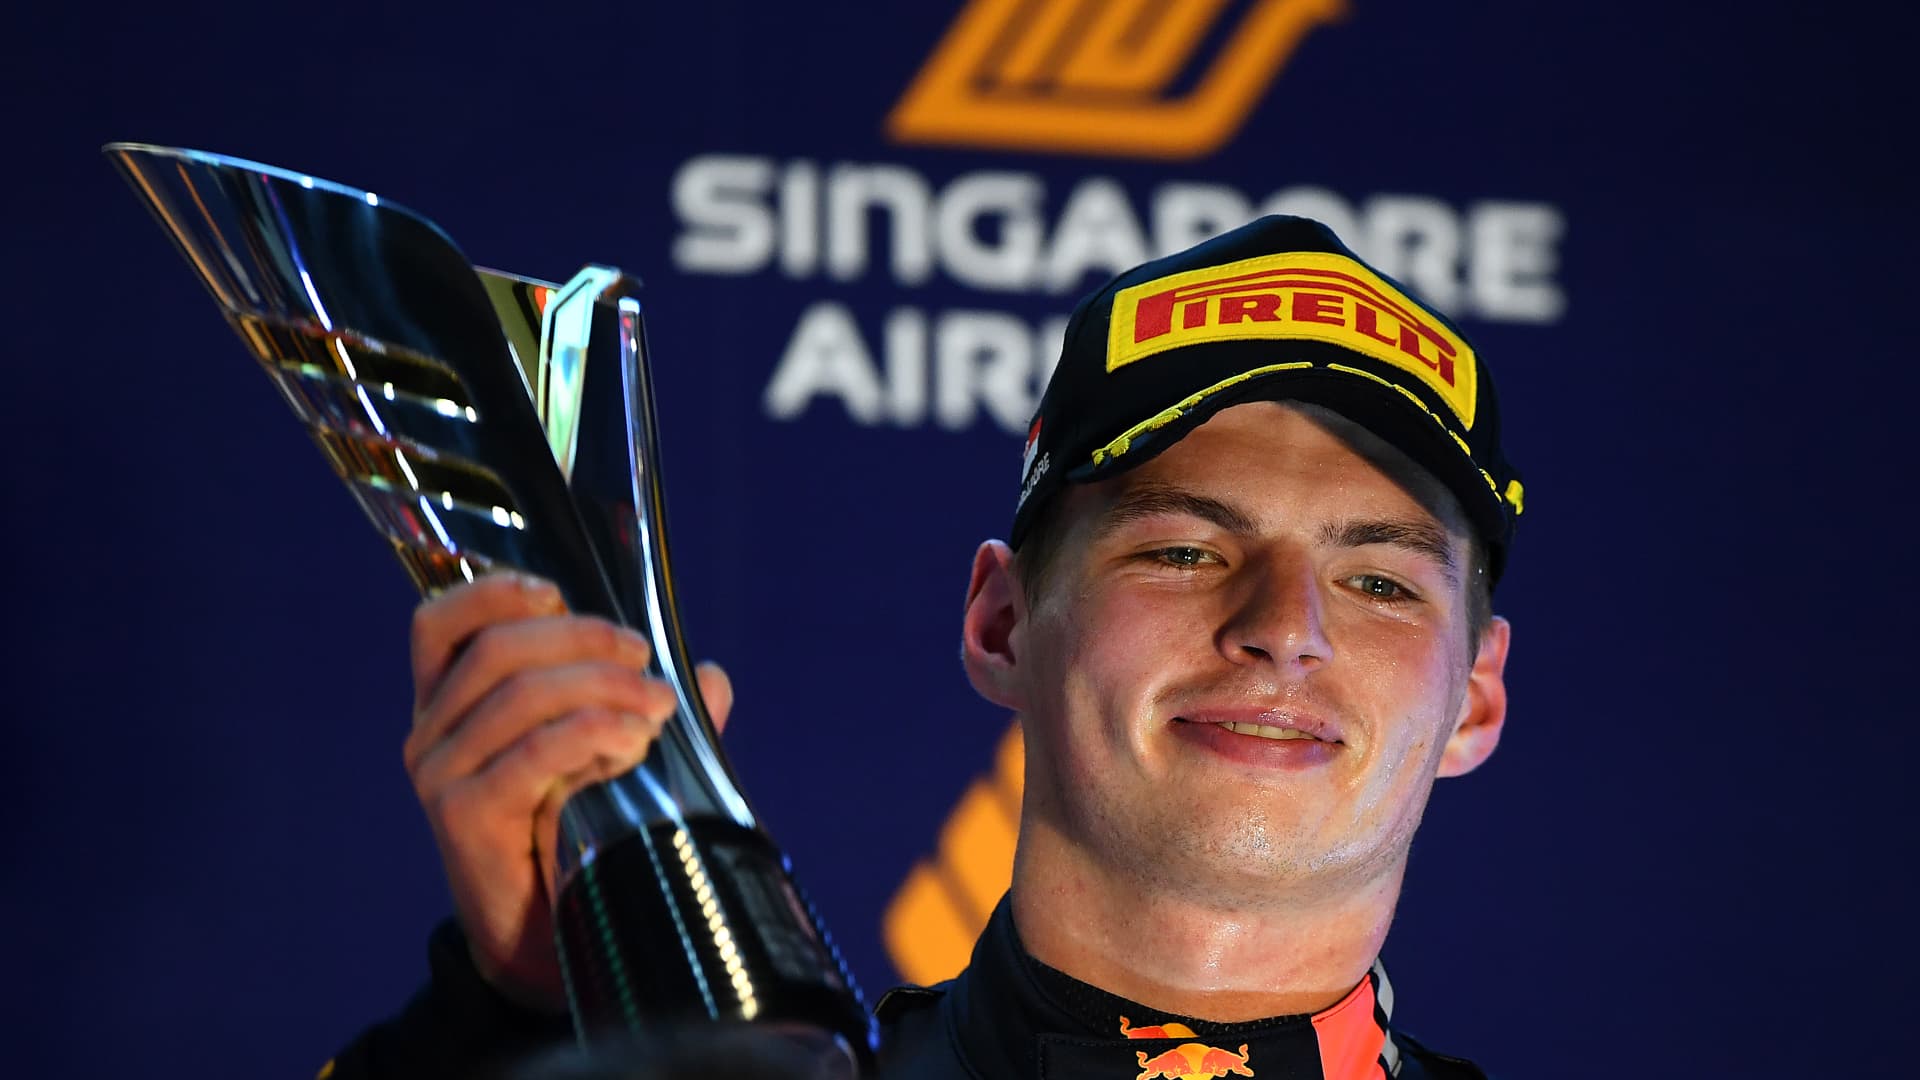 Max Verstappen wins third place and celebrates on the podium during the Singapore Grand Prix at the Marina Bay Street Circuit on Sept. 22, 2019. The Singapore Grand Prix is set to return as the Formula One's only night race on Oct. 2.